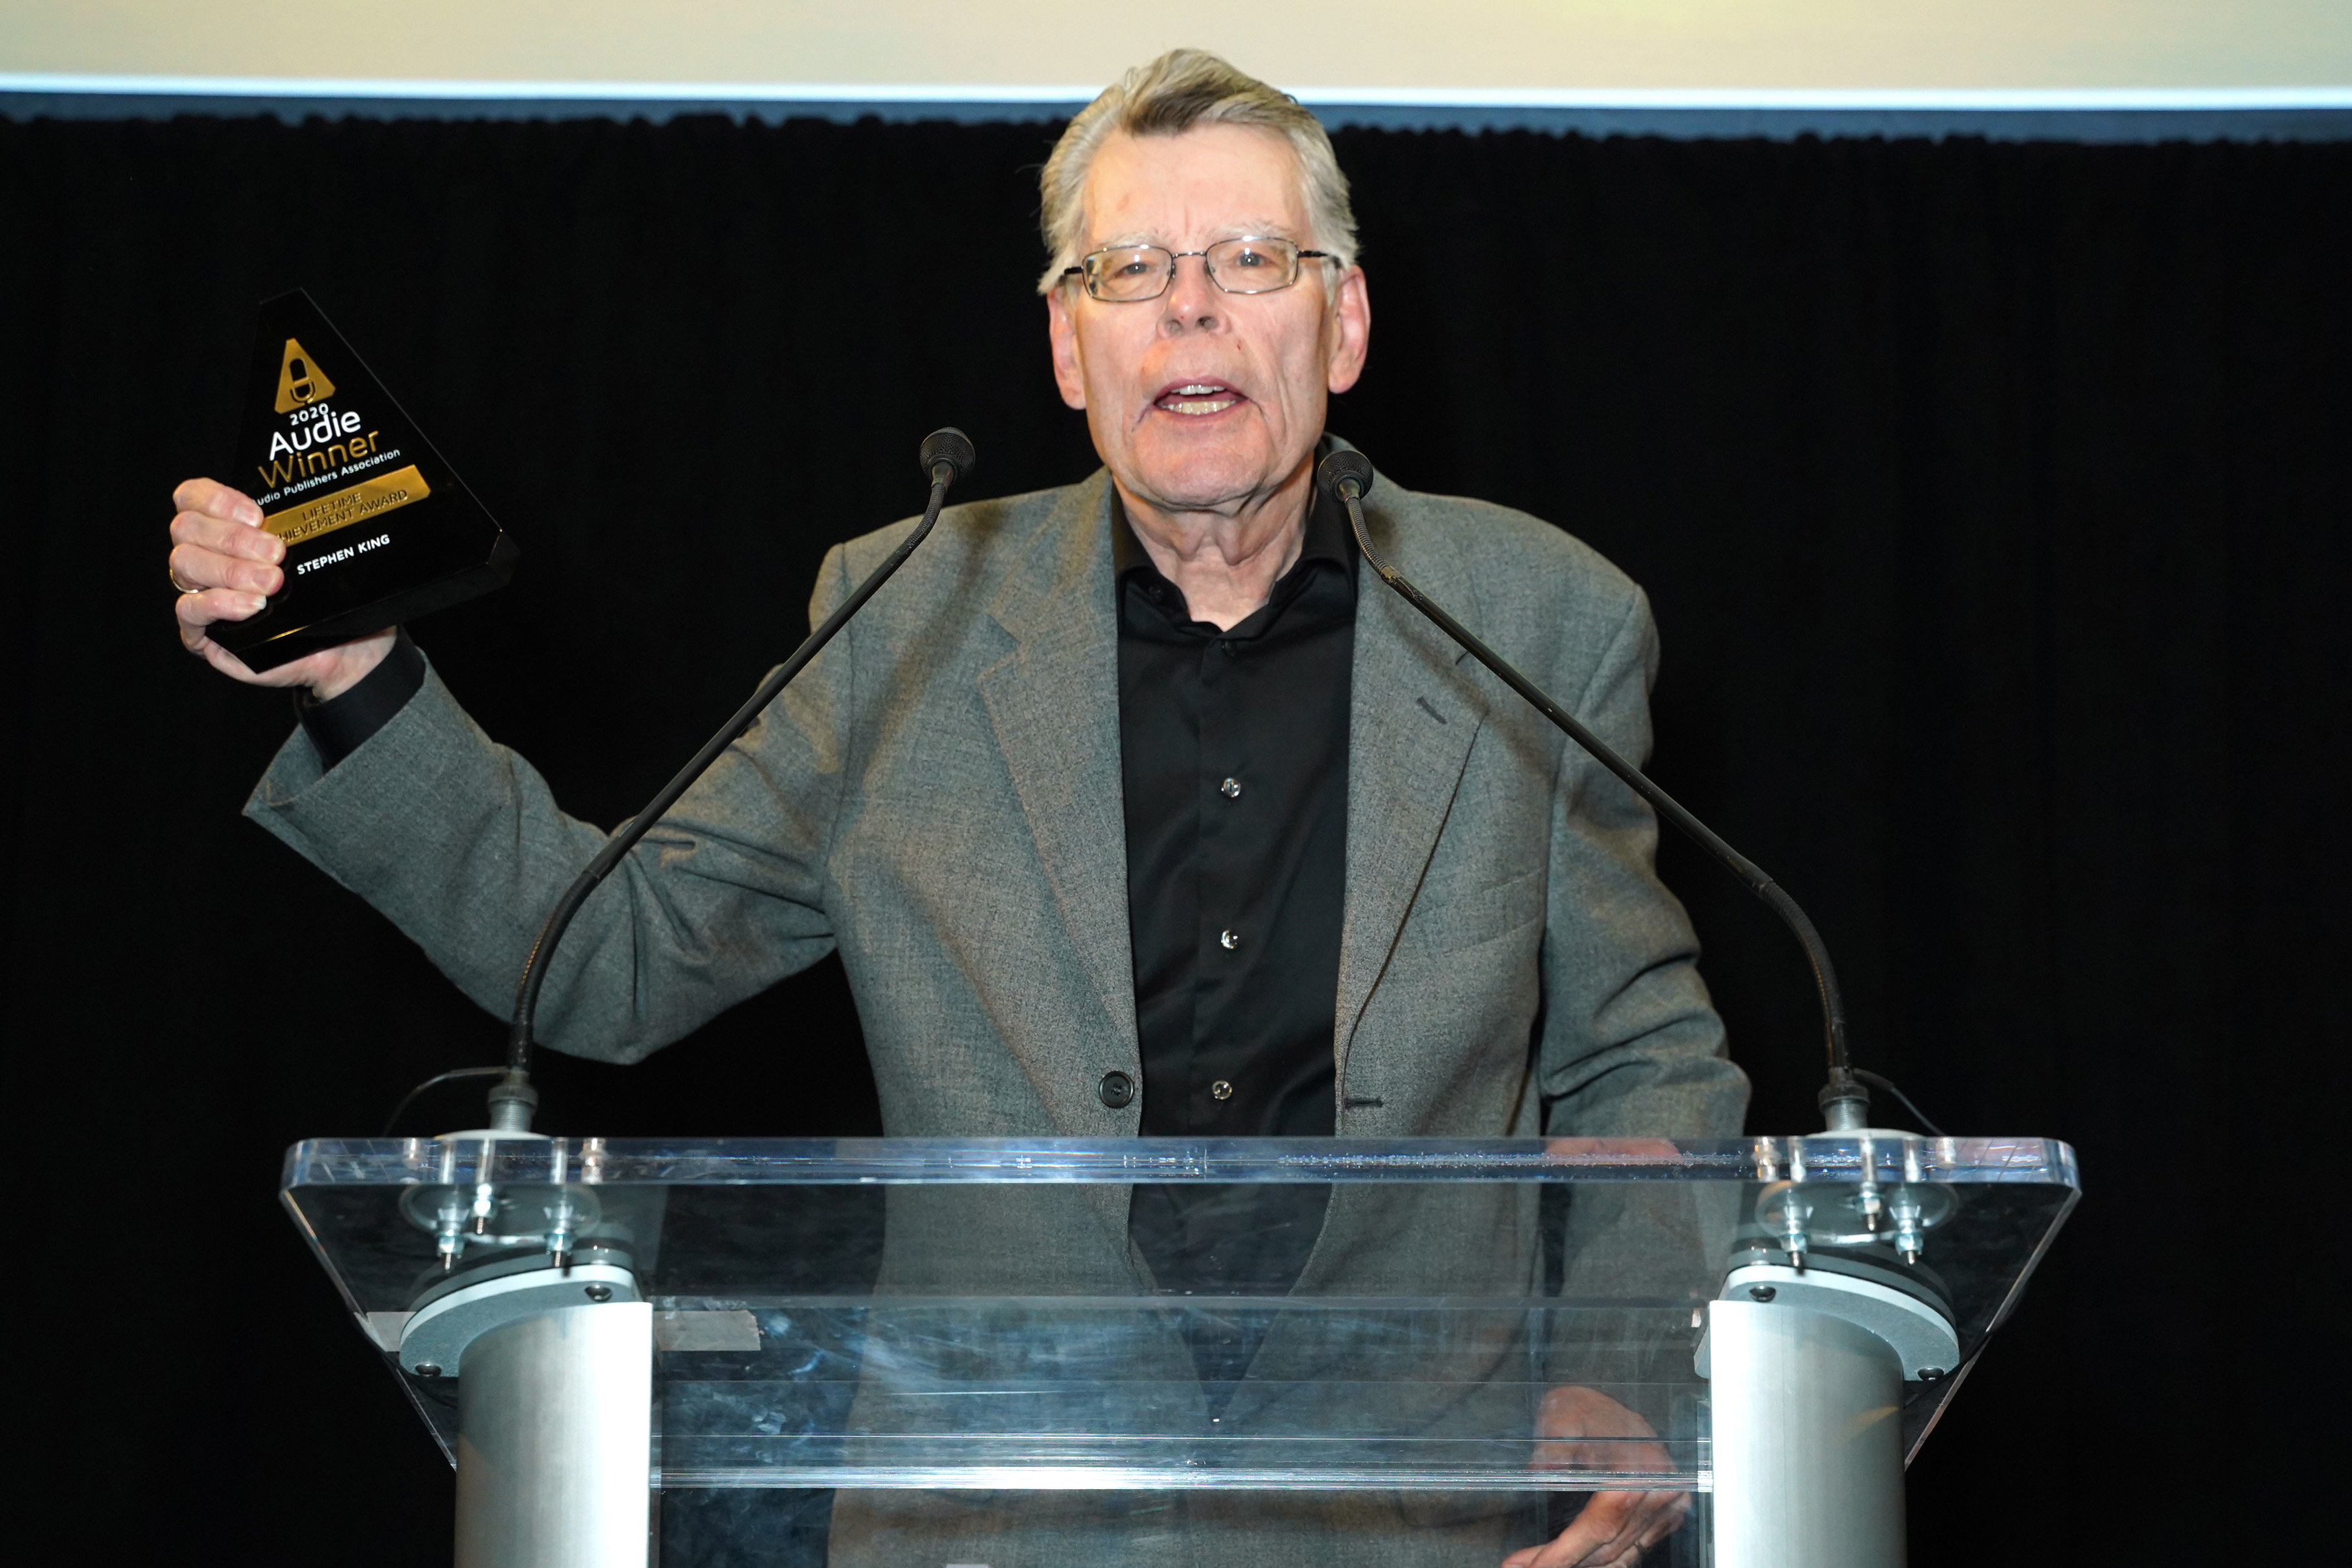 Stephen King at the 2020 Audie Awards in New York City.